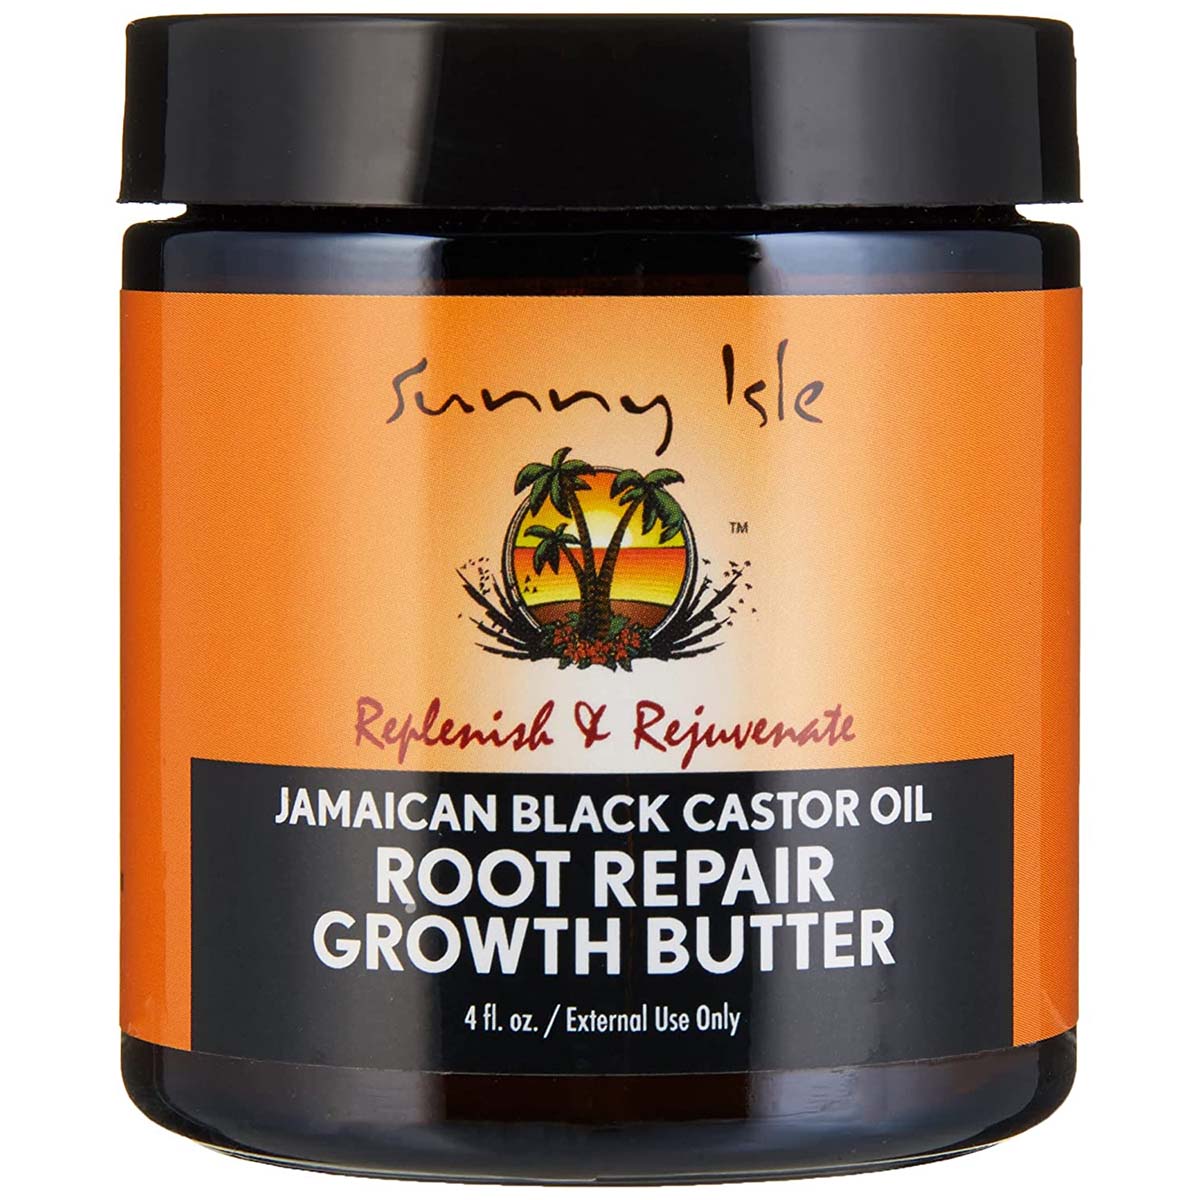 Sunny Isle Jamaican Black Castor Oil Root Repair Growth Butter - 4oz